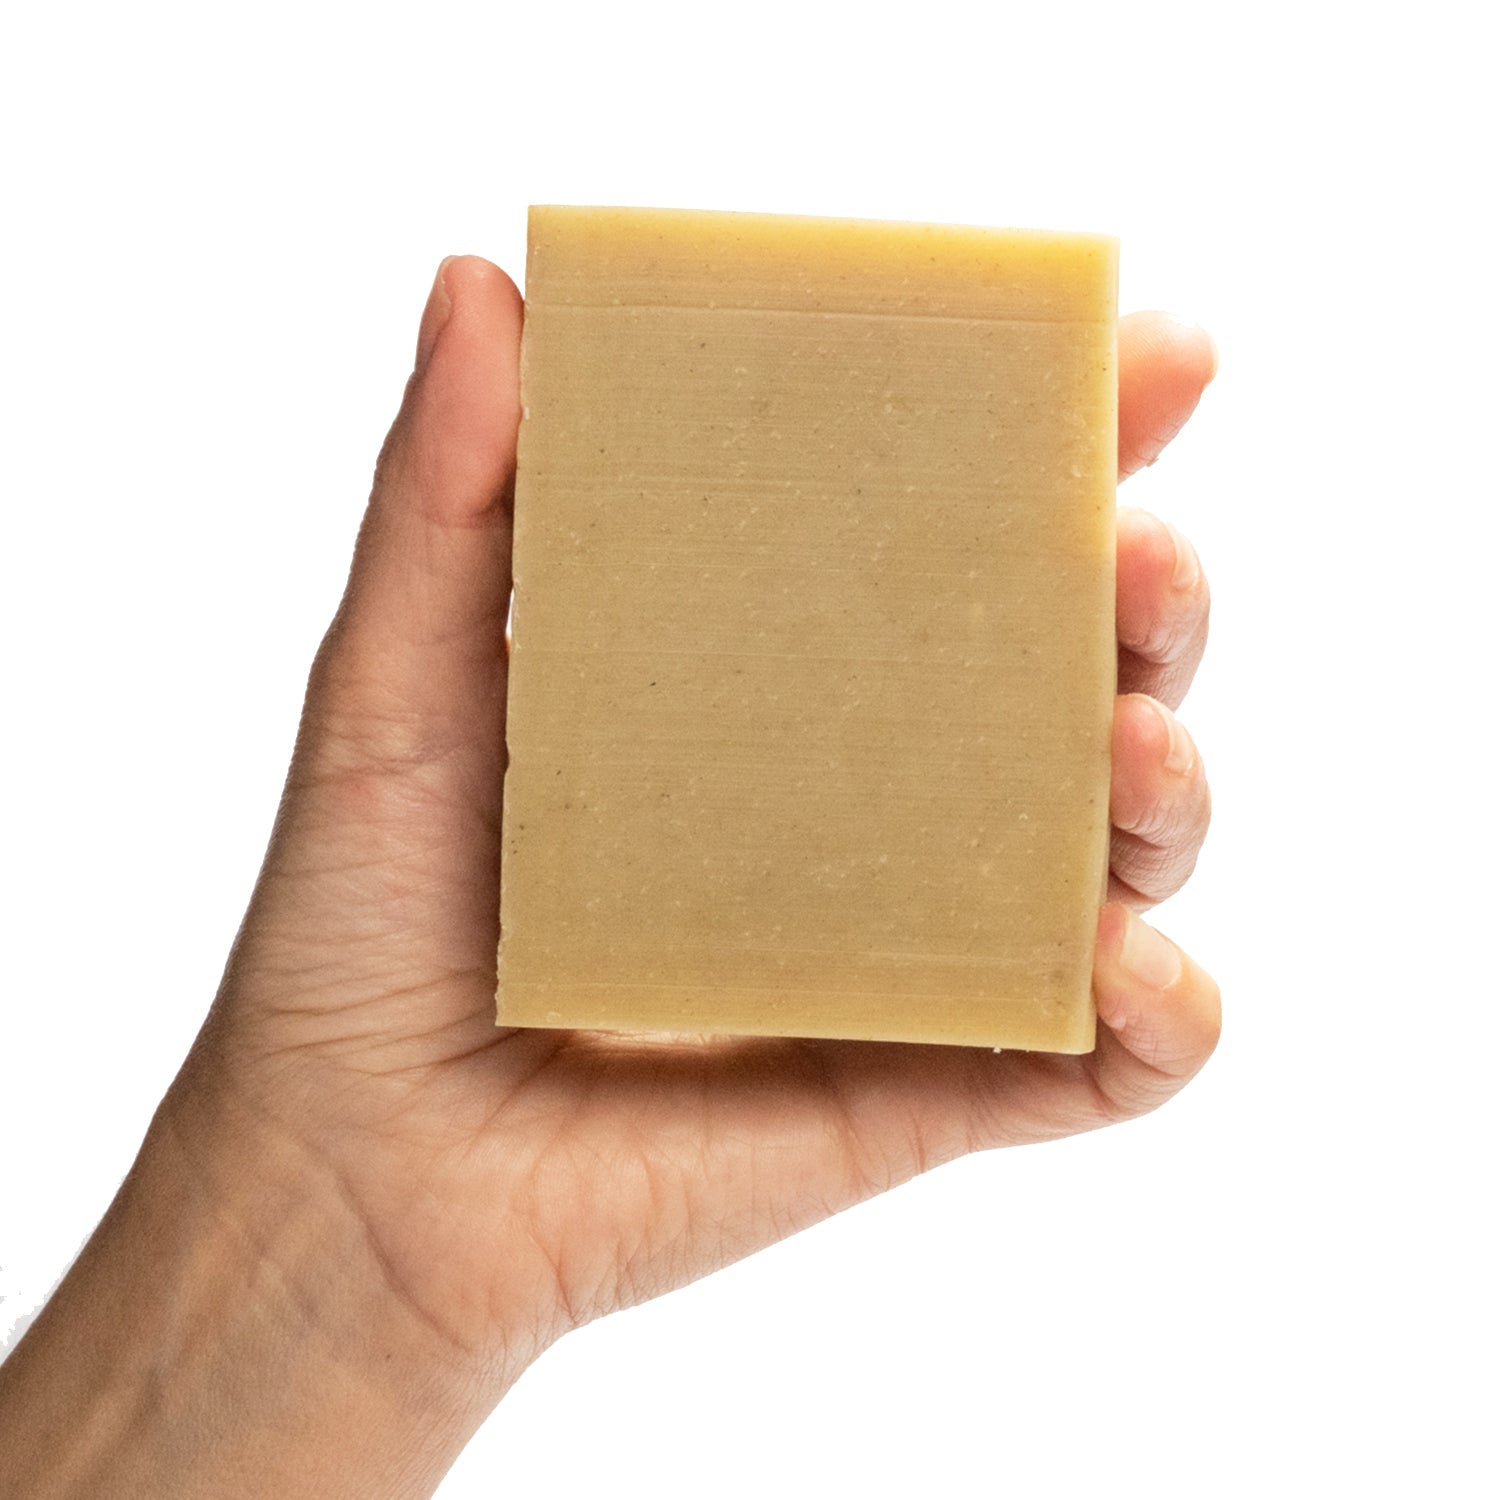 A naked bar of Face Mate Teatree essential oil and rhassoul clay organic bar soap from ground Soap in a hand.